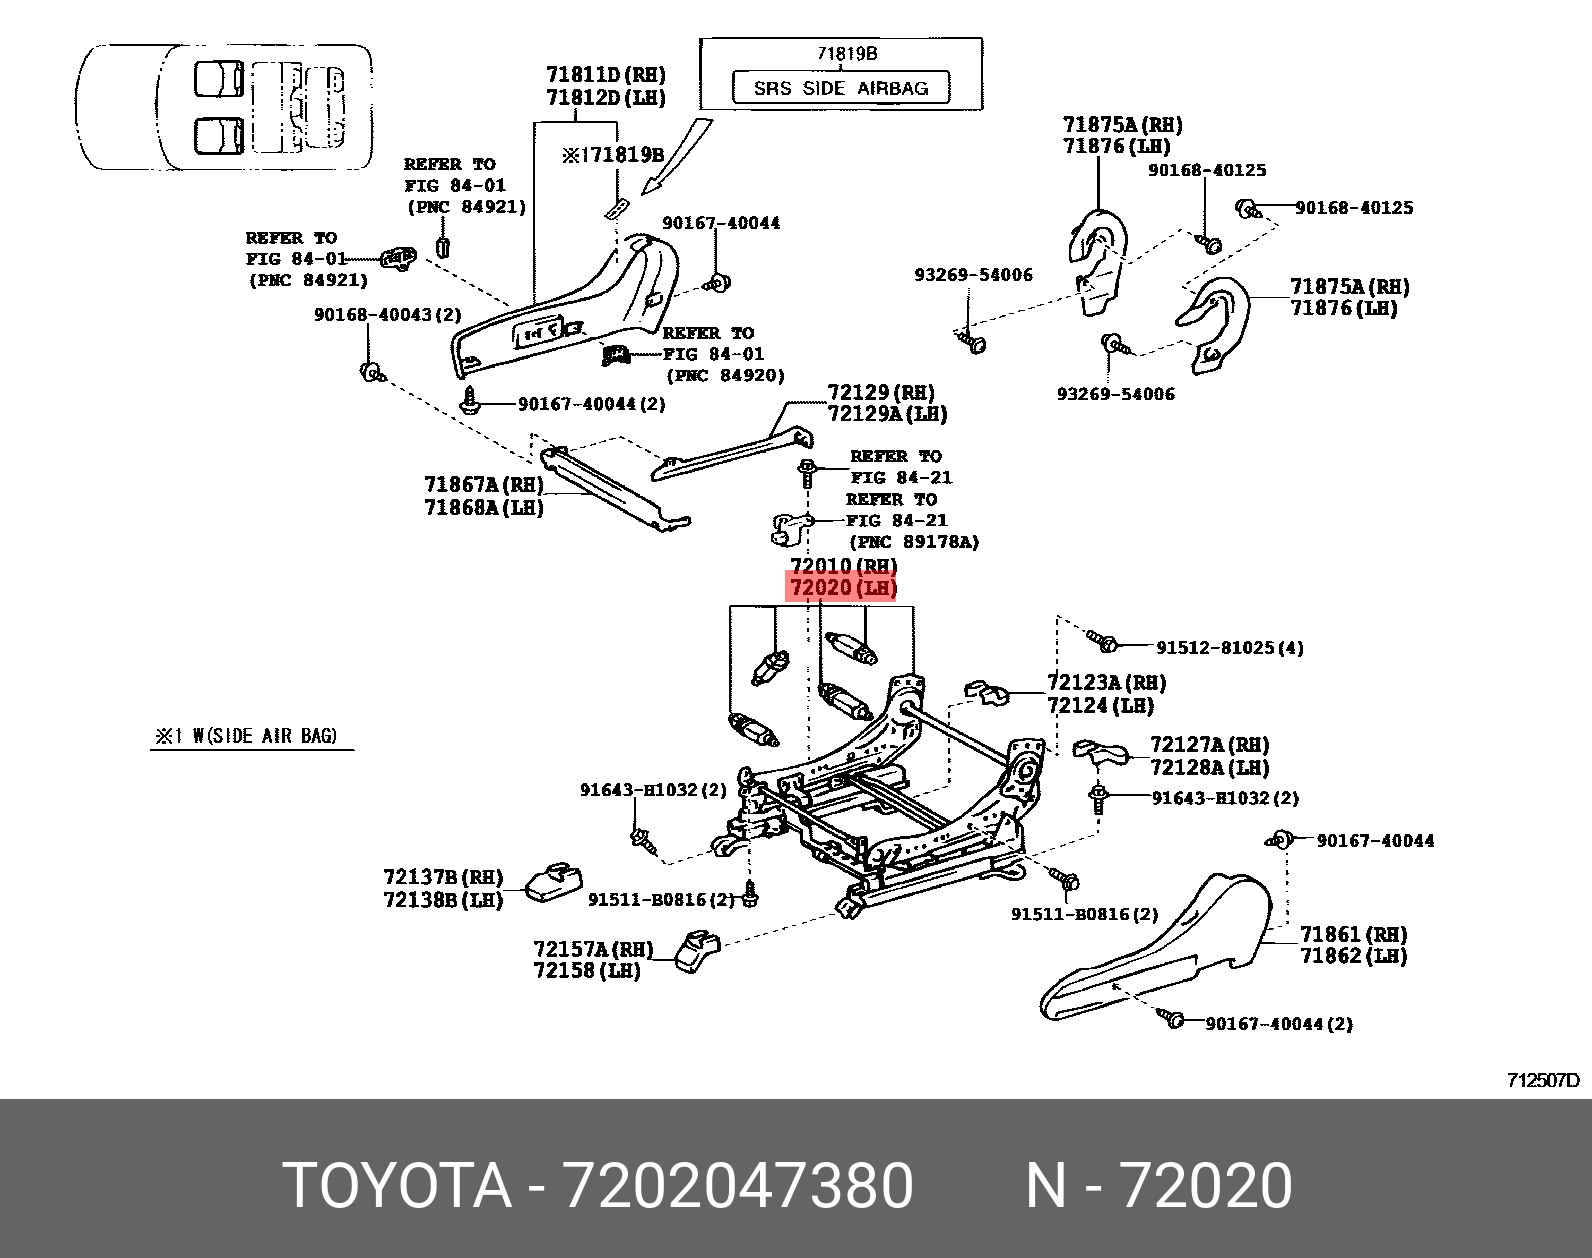 CAMRY 201706-, ADJUSTER ASSY, FRONT SEAT, LH